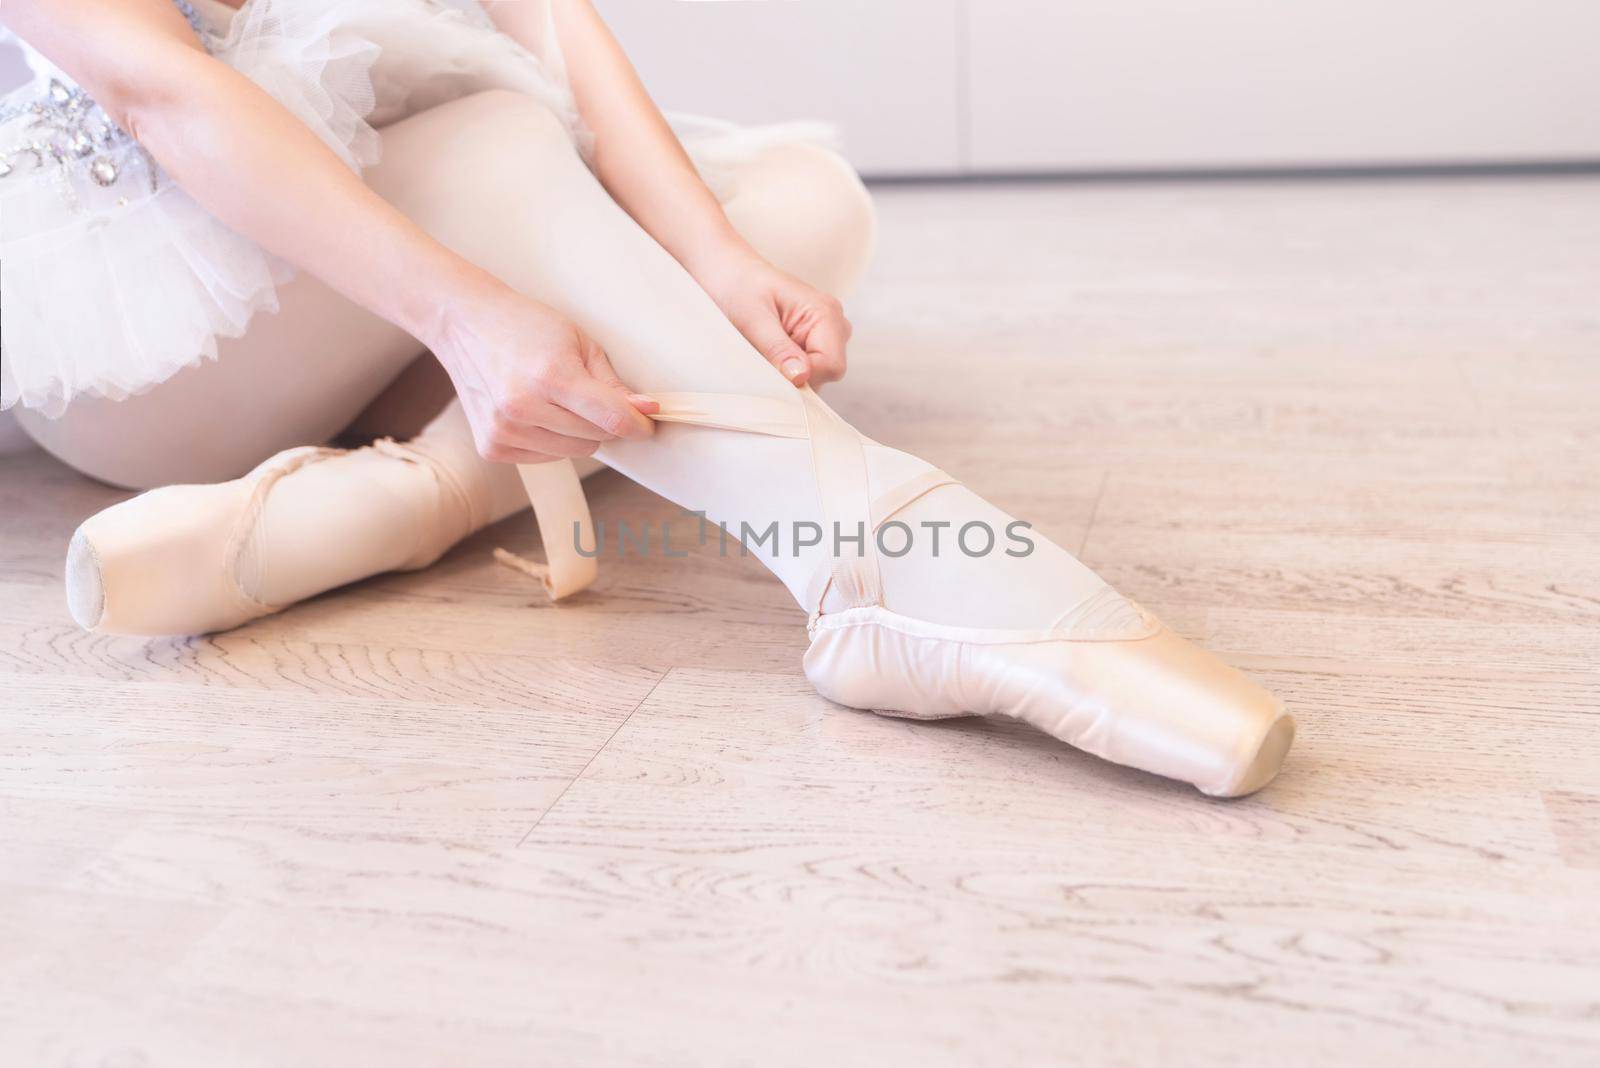 A ballerina sitting on the floor tying her ballet shoes by Nickstock